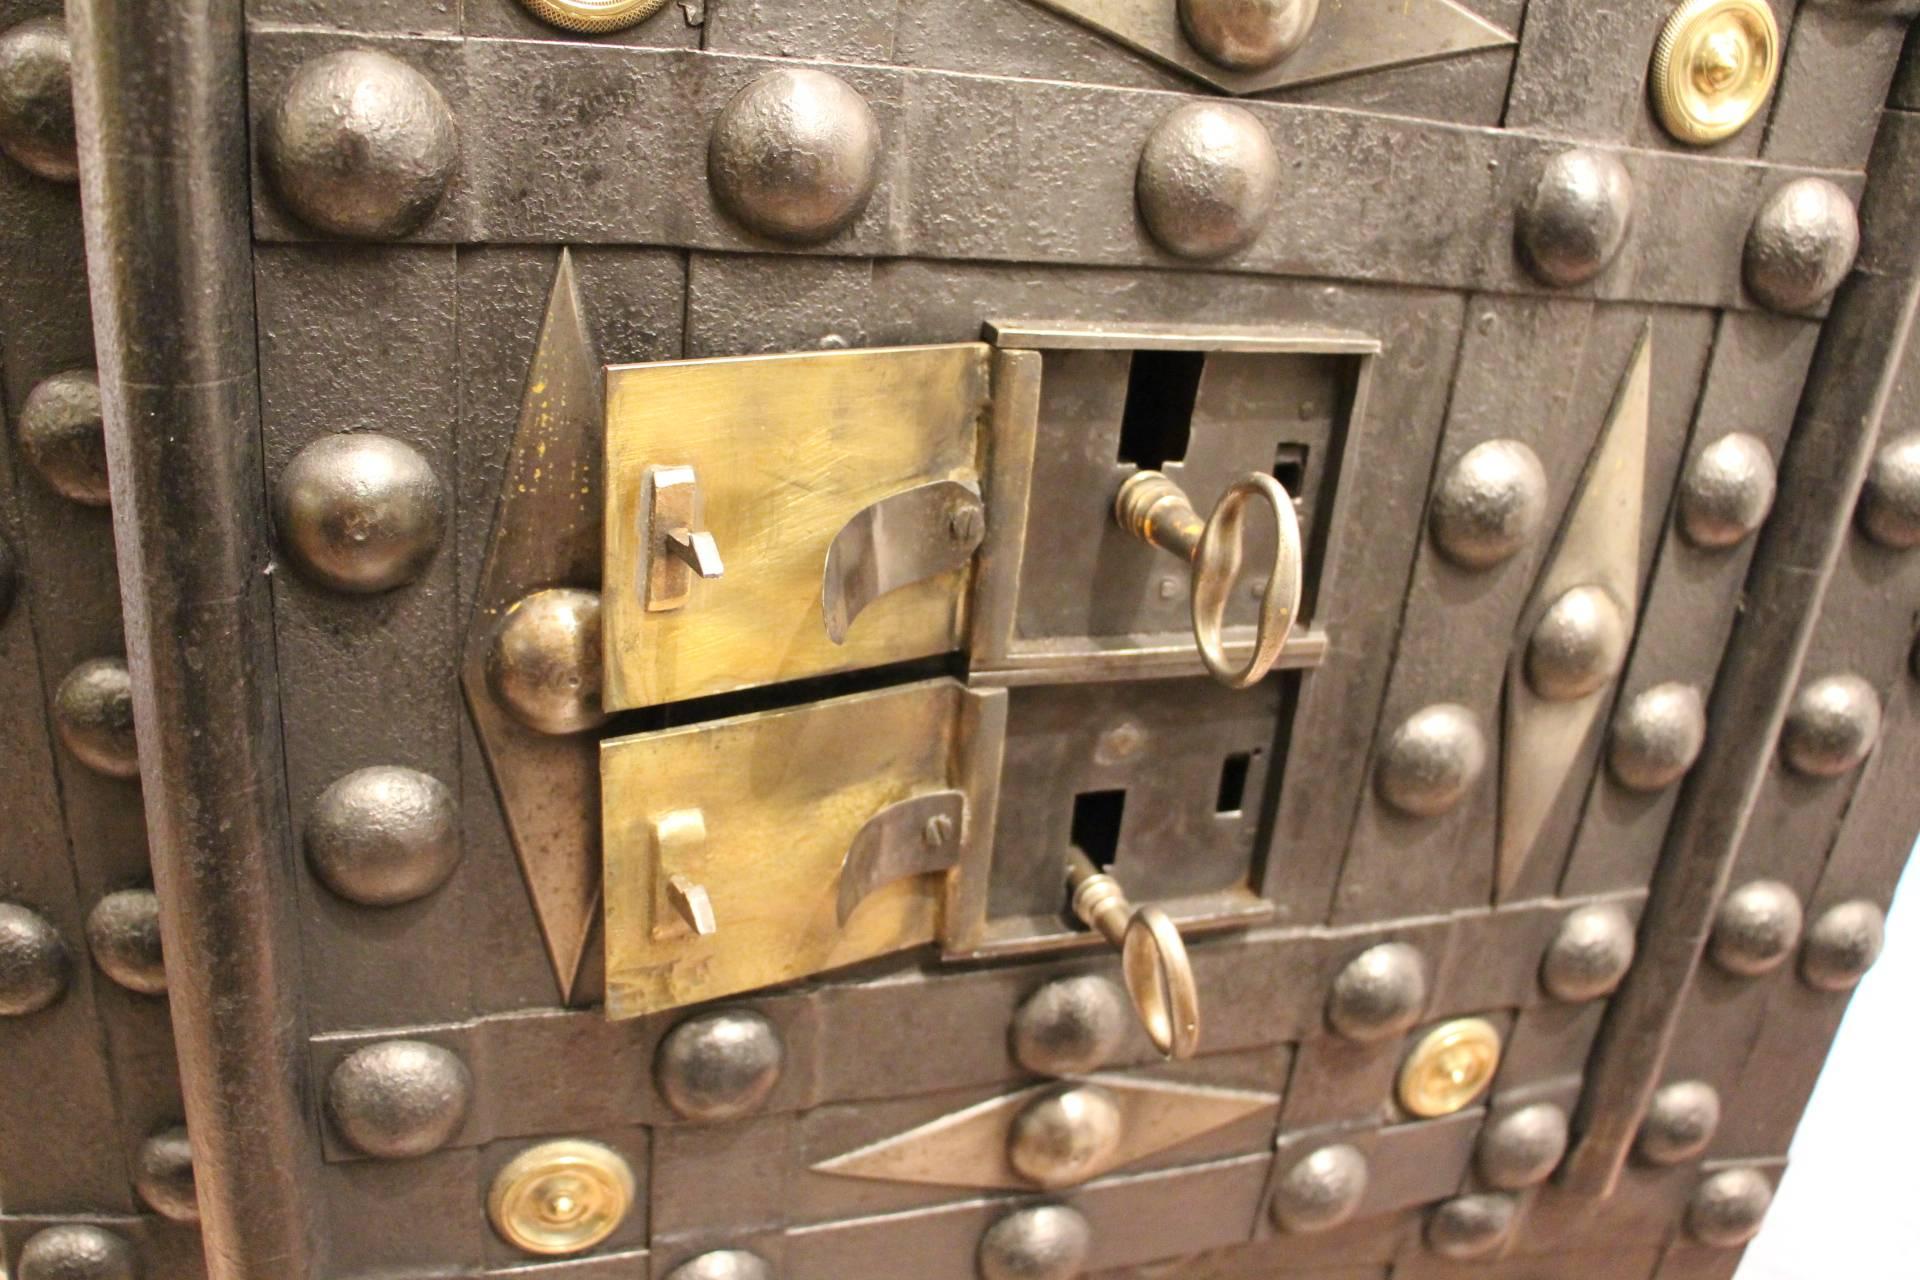 Late 19th Century 19th Century, Black Steel and Iron Safe with Its Keys and Working Combination